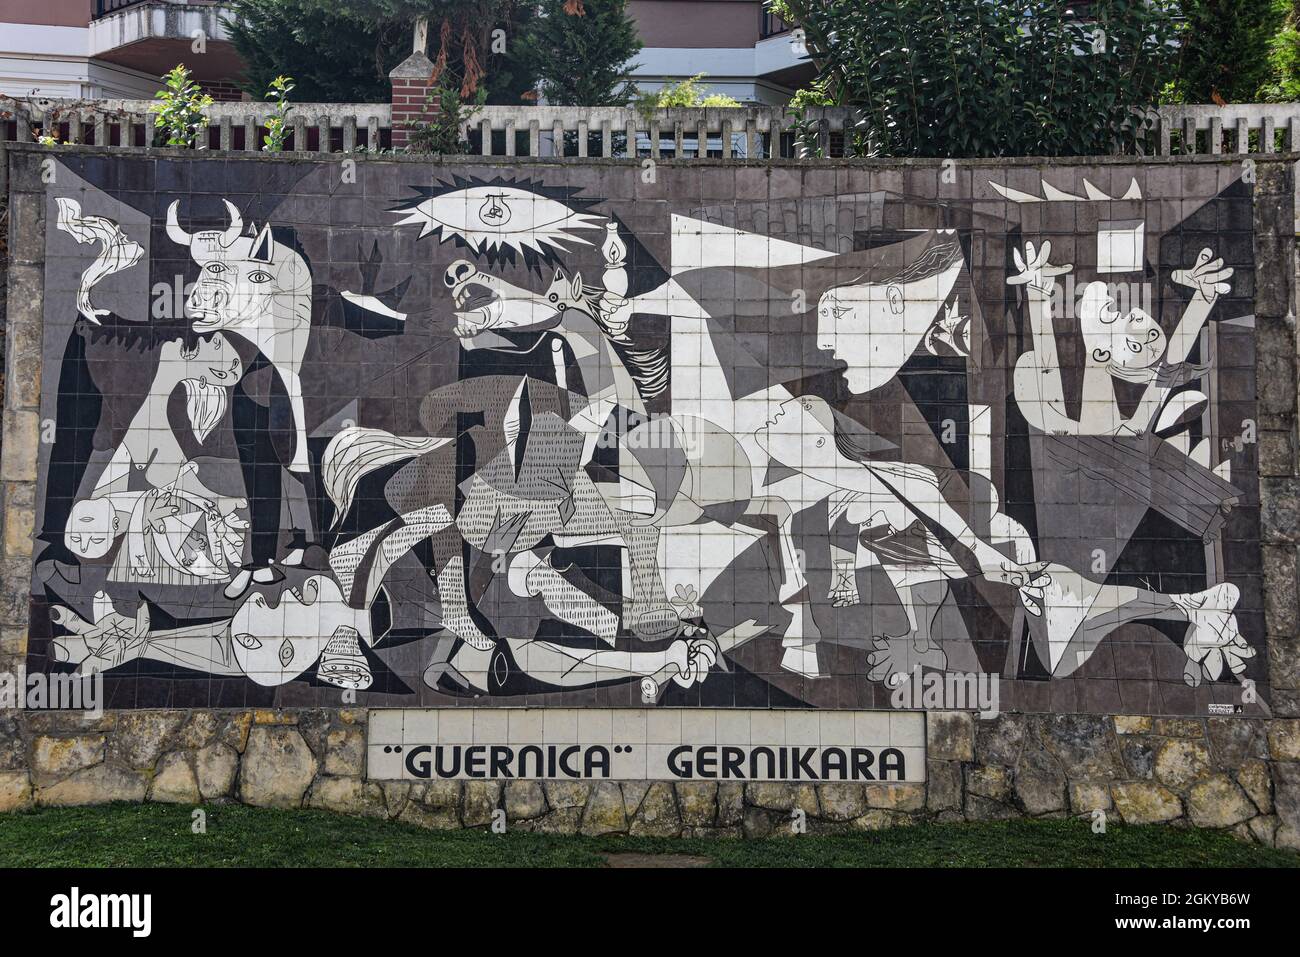 Guernica, Spain - 11 Sept 2021: Ceramic mural of Picasso's painting of Guernica Stock Photo